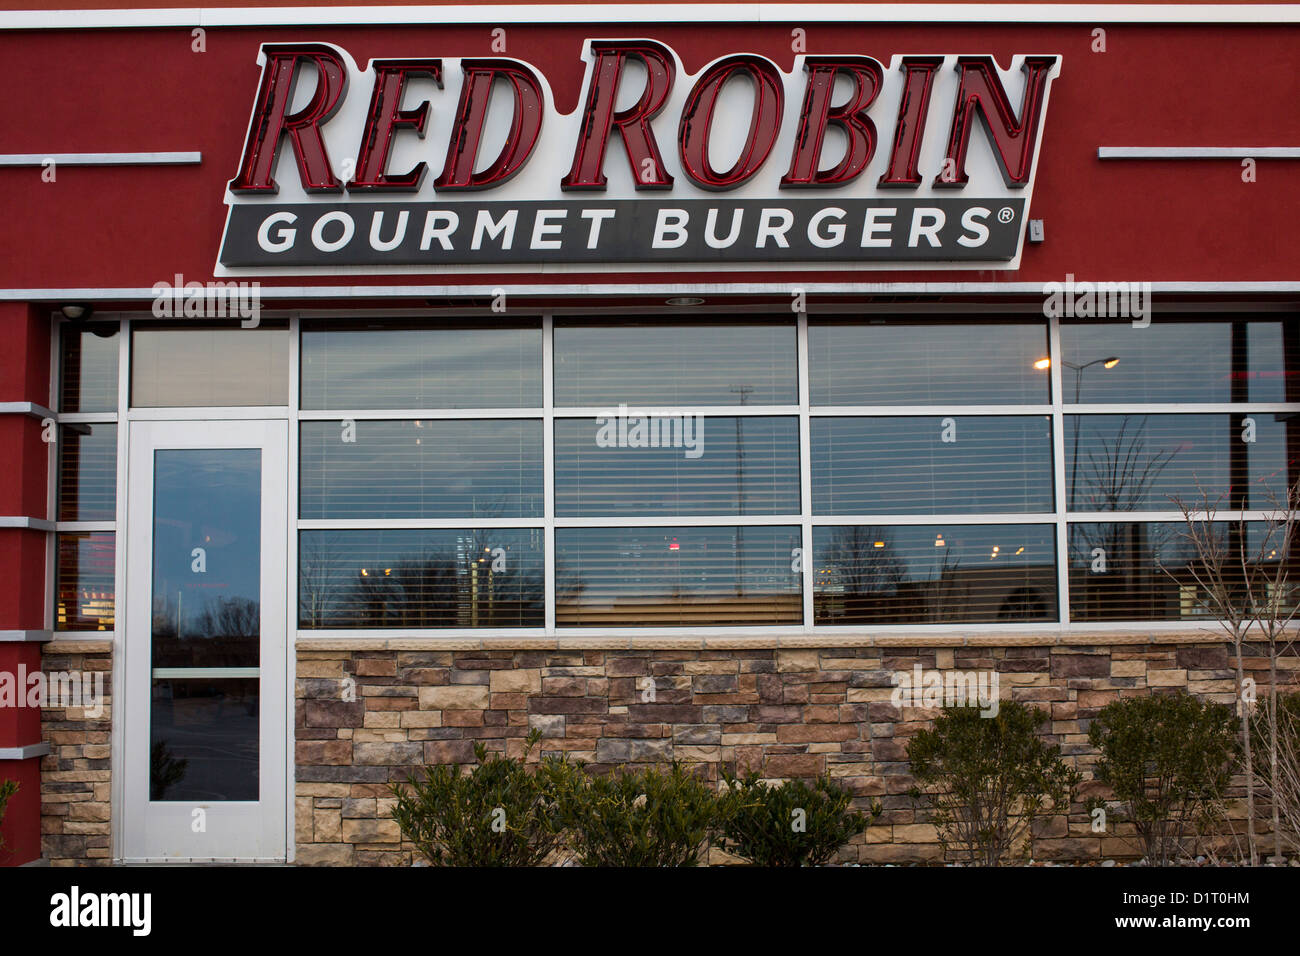 A Red Robin Gourmet Burgers casual dining chain restaurant.  Stock Photo